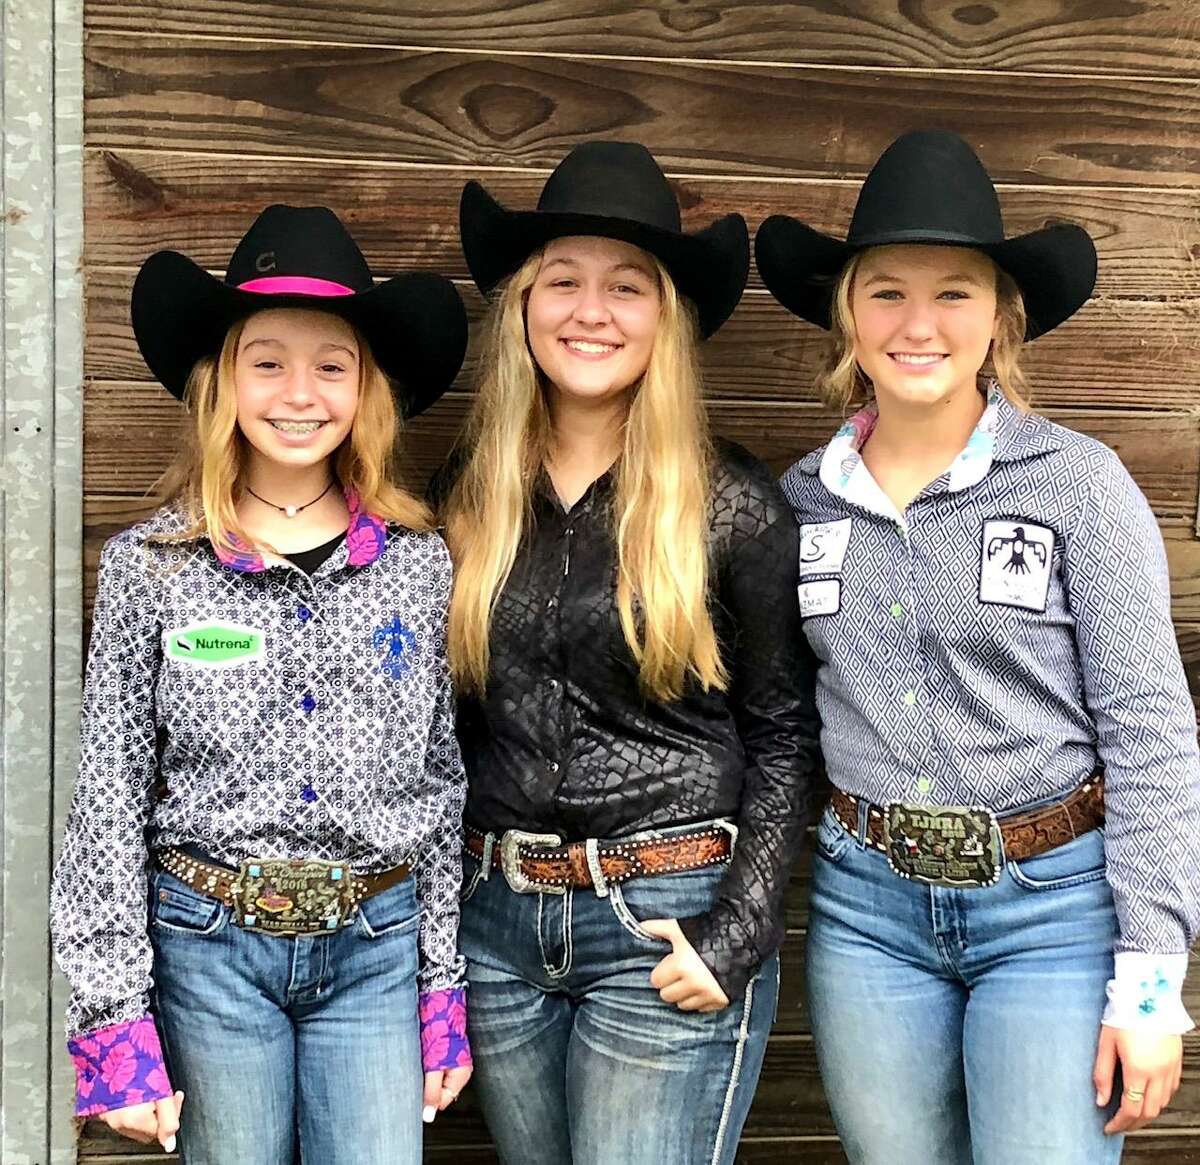 Montgomery County residents Jamie Spikes, 16, Jordan Jackson, 12, and Carson Rutherford, 14, will be traveling to Las Vegas this December to compete in the Junior National Finals Rodeo. Pictured left to right are Jordan Jackson, Jamie Spikes and Carson Rutherford